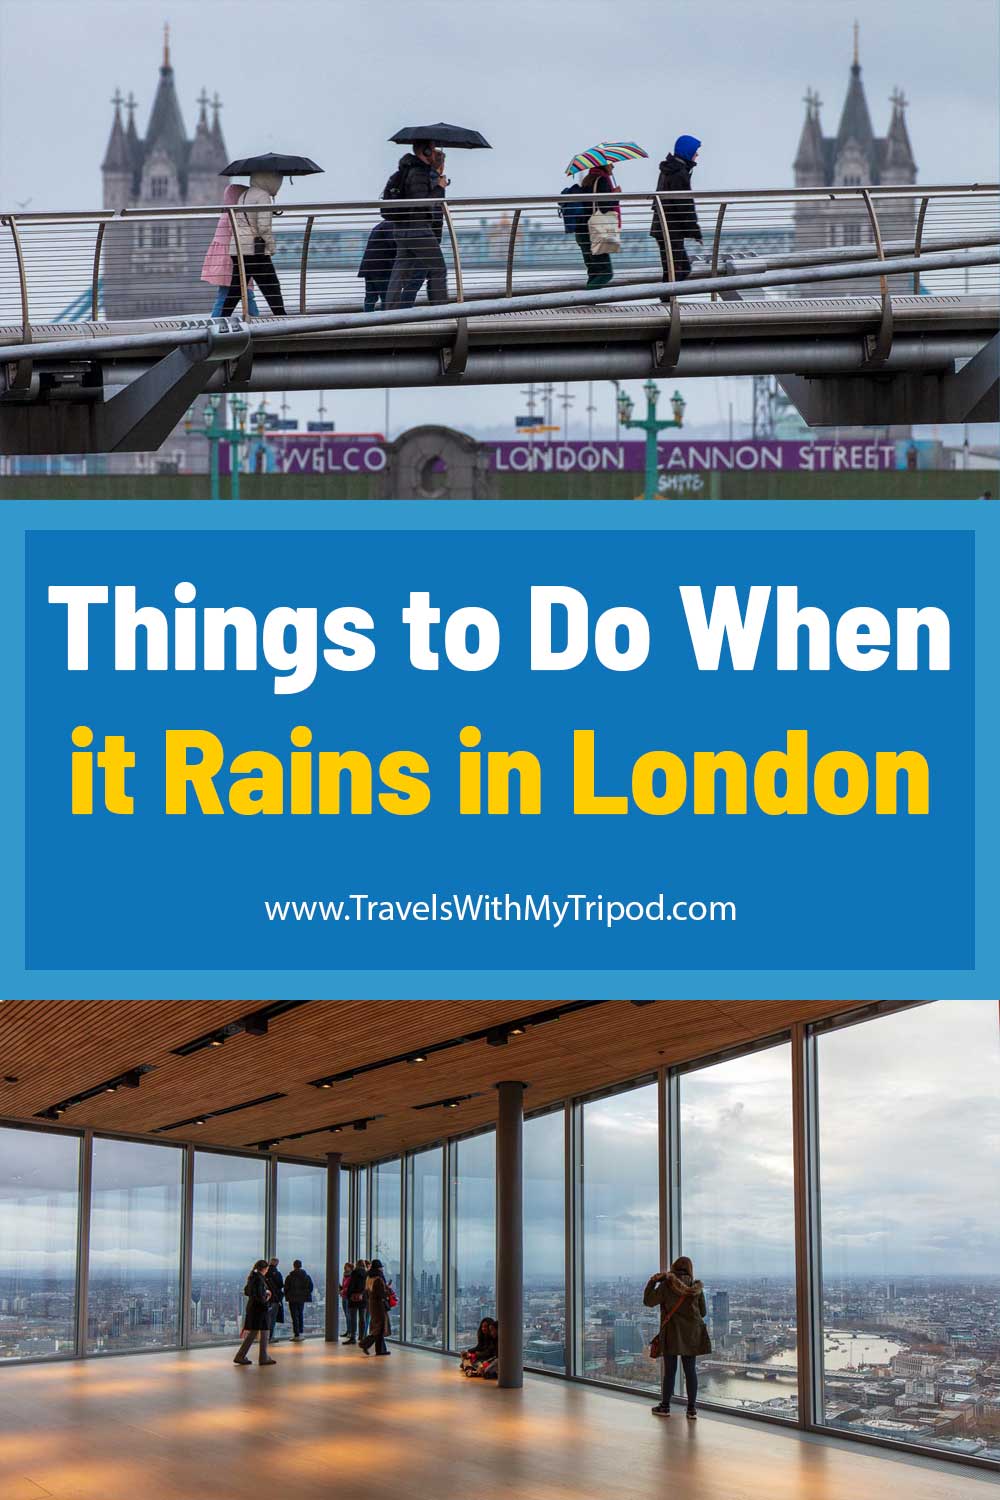 Things to do in London when it rains